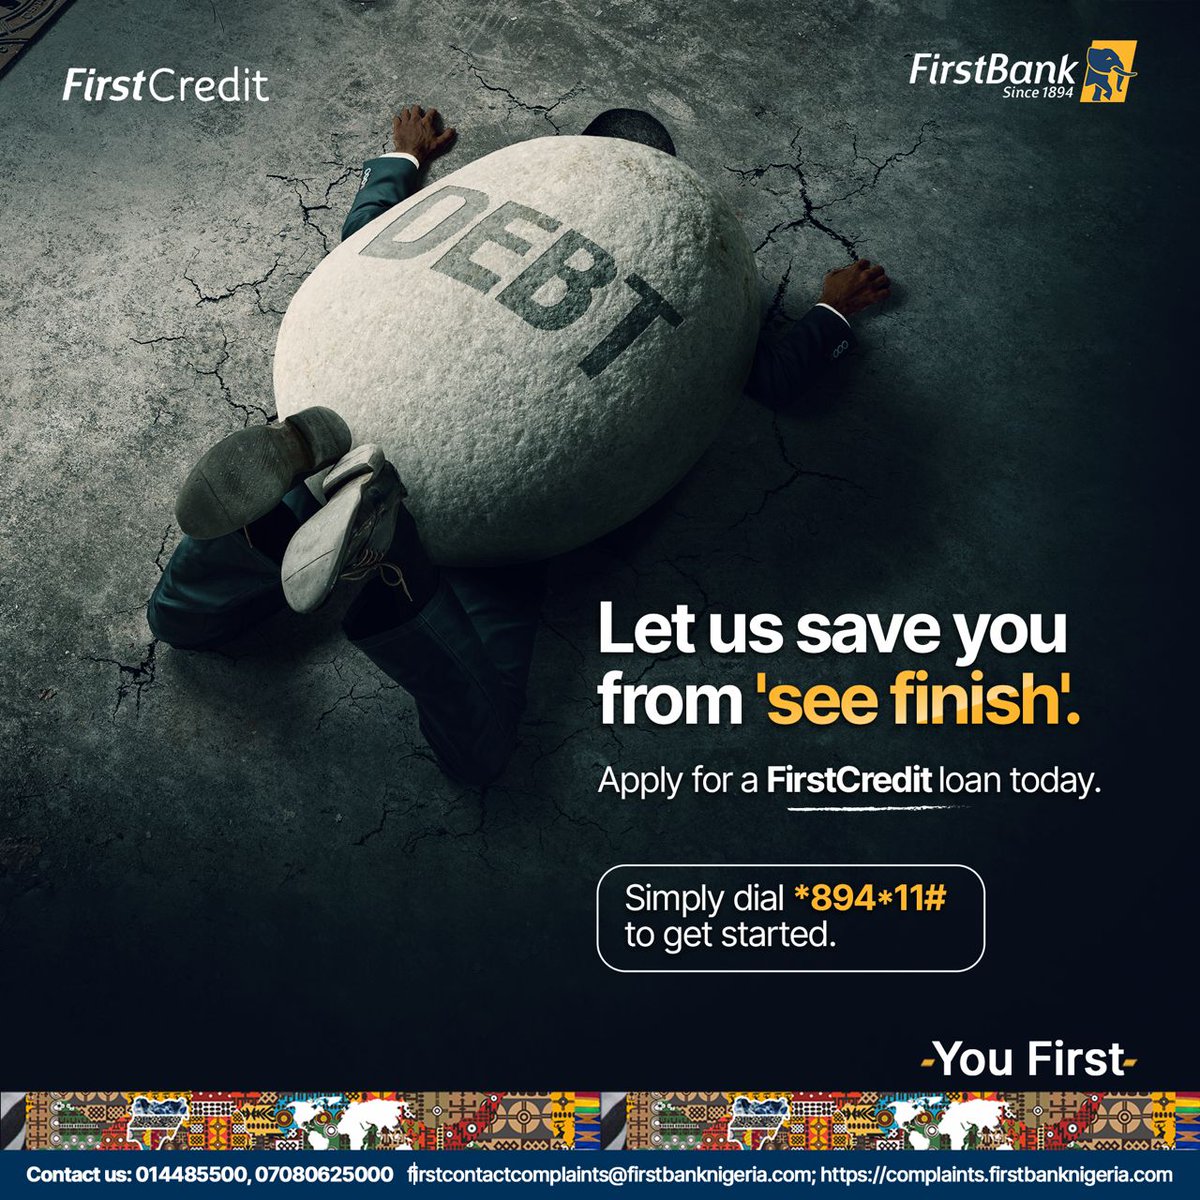 We are here to put You First and take care of your finances. Visit (firstbanknigeria.com/personal/loans…) to learn more. #YouFirst #FirstBank #FirstCredit